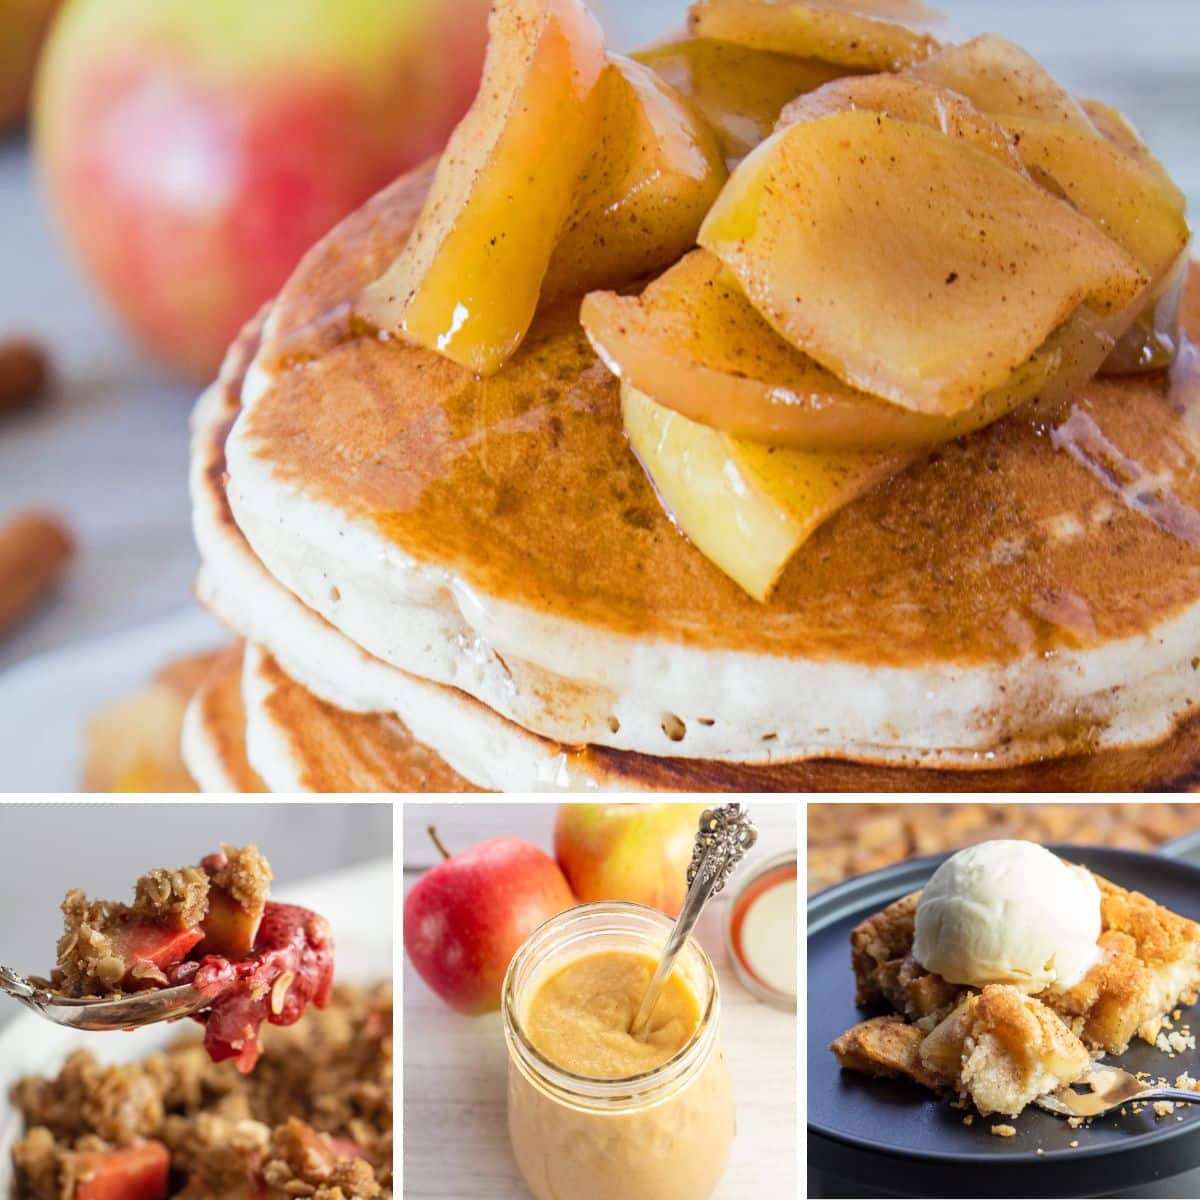 Best apple recipes to make and enjoy any day of the week featuring 4 recipes in a collage image.